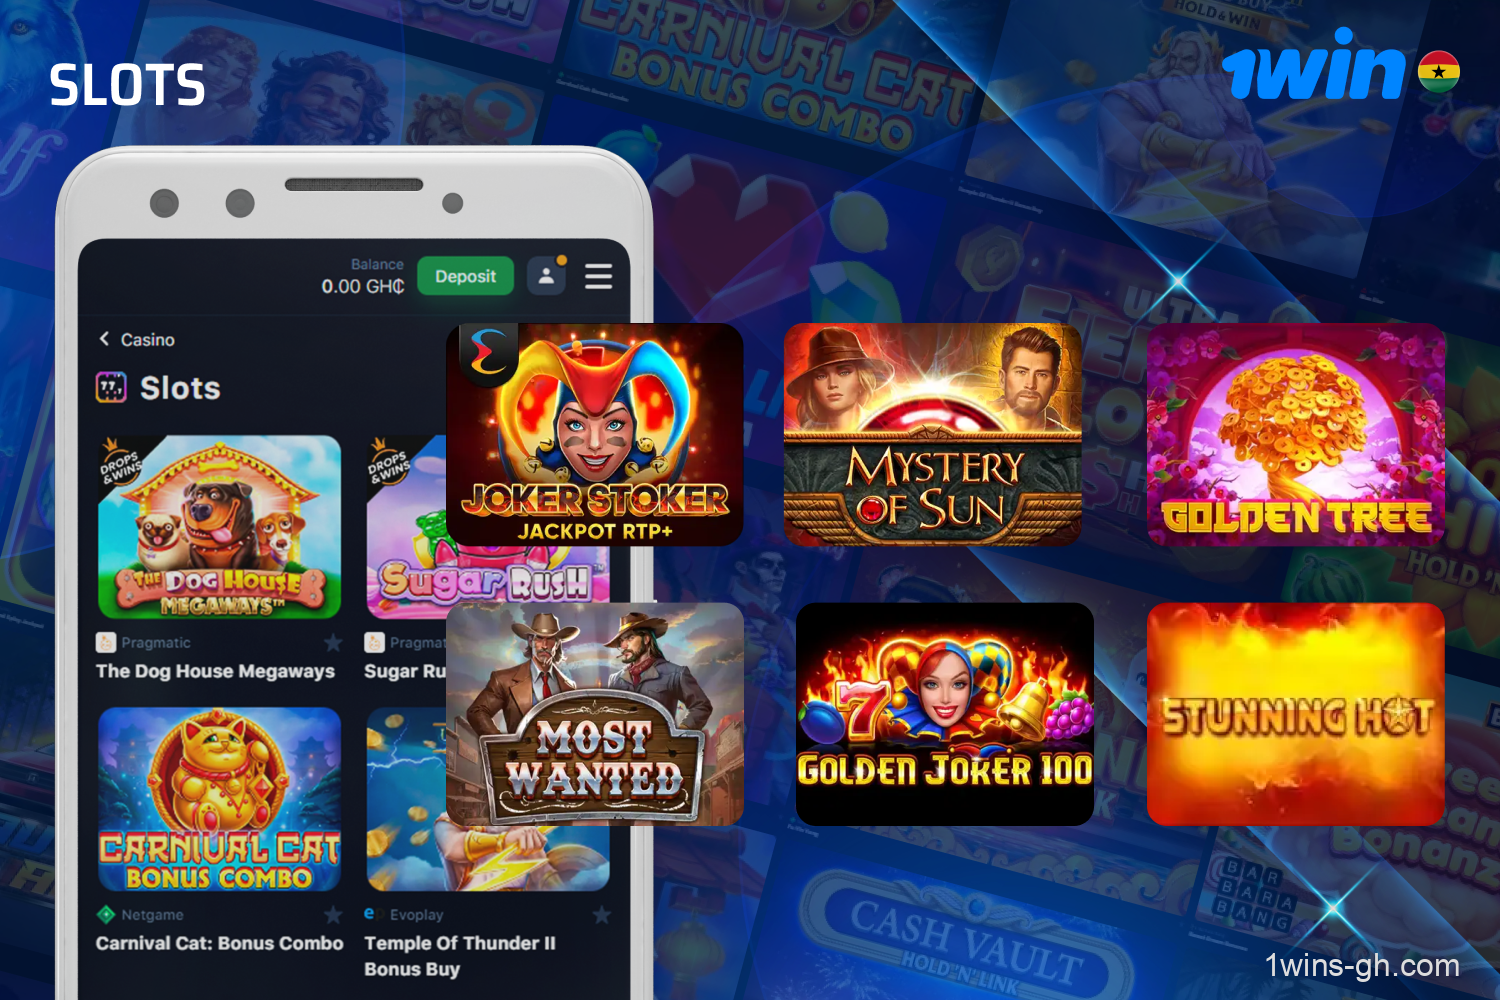 Slots is 1win's largest category of games with over 12,000 slot machines